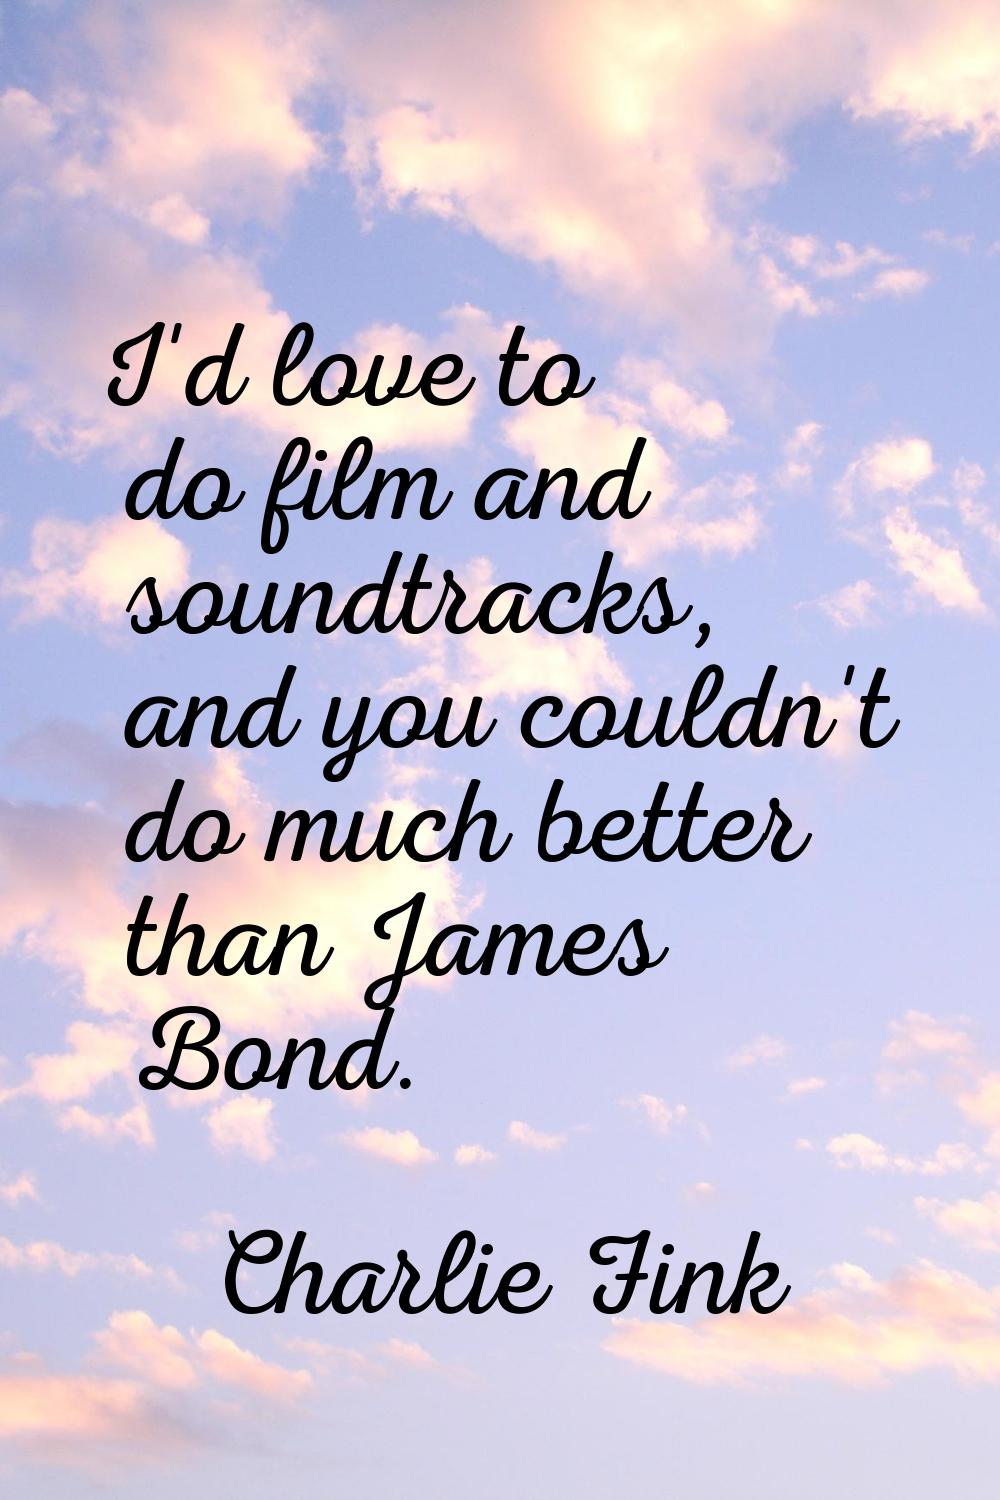 I'd love to do film and soundtracks, and you couldn't do much better than James Bond.